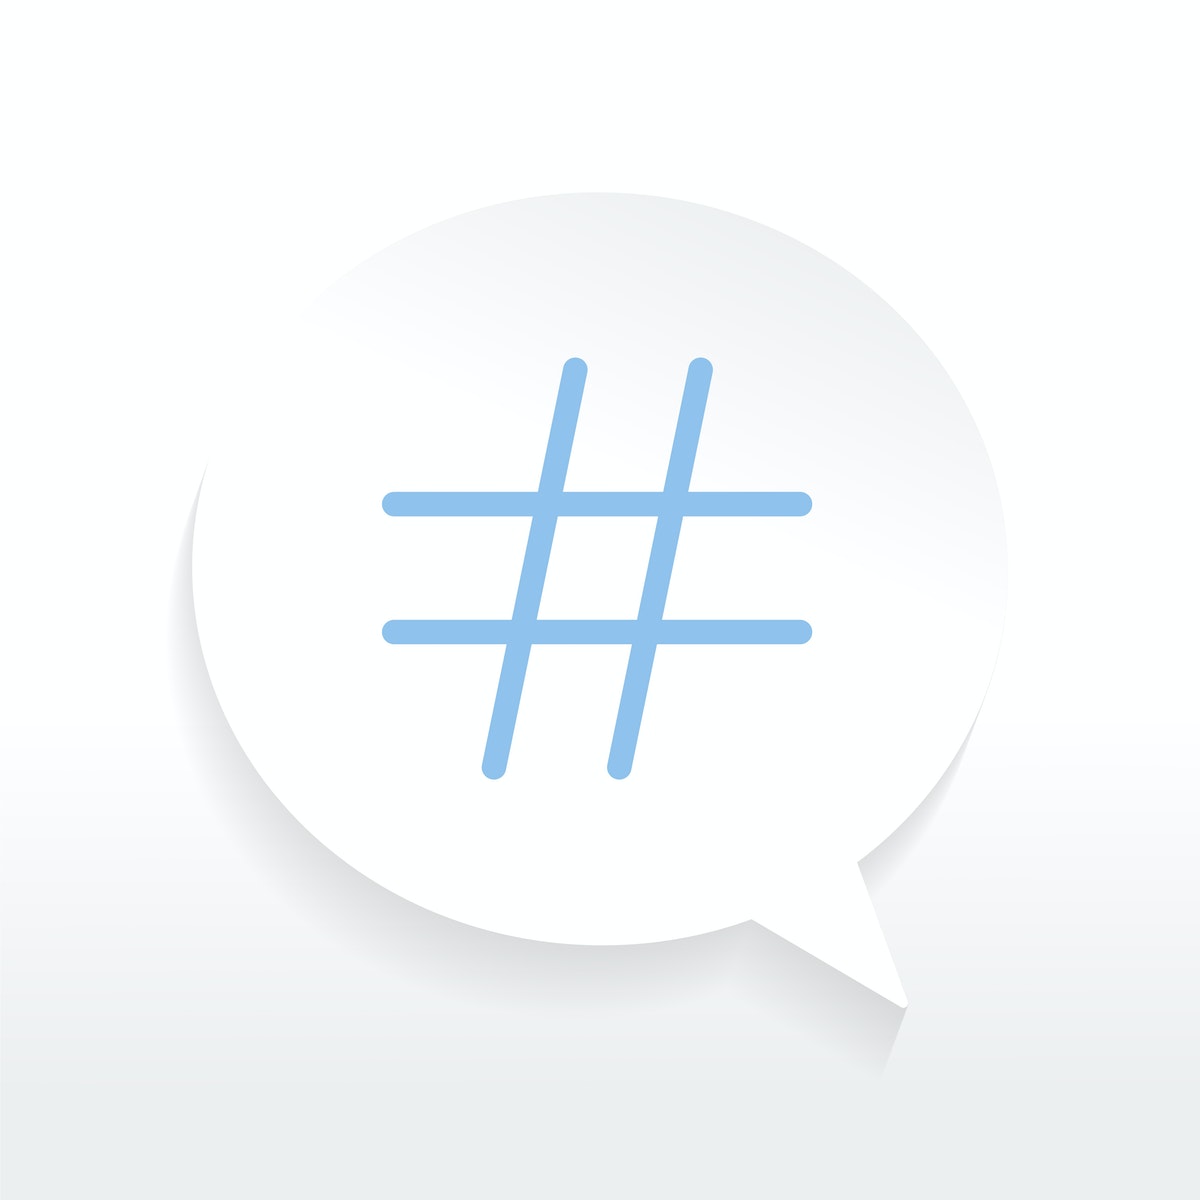 How to Increase Your Earnings with Hashtags